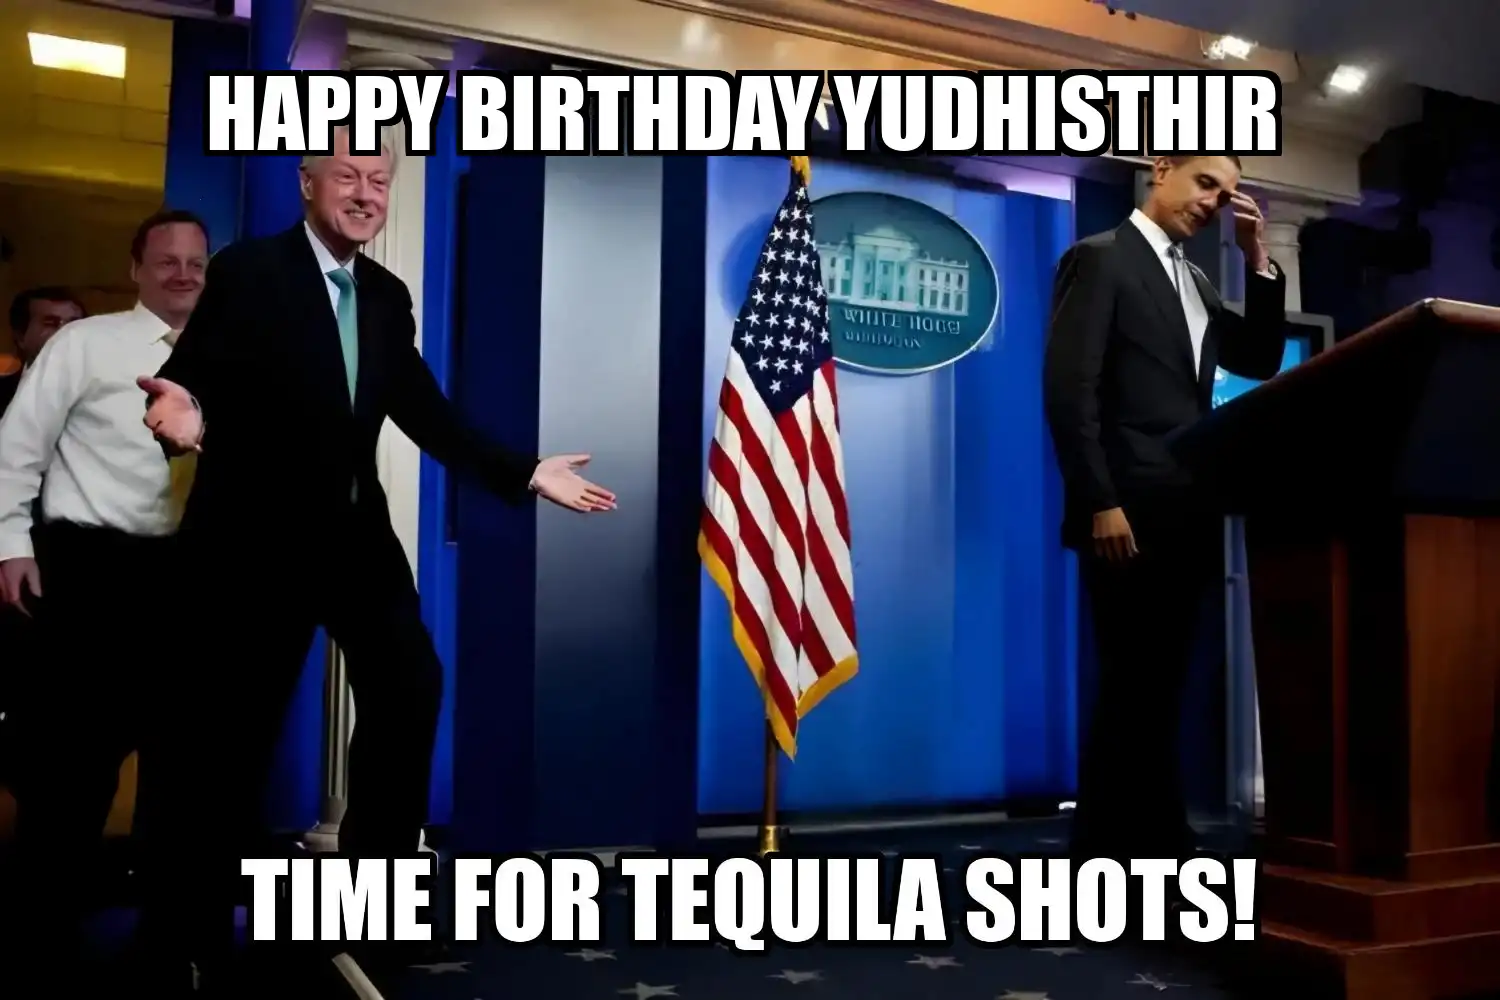 Happy Birthday Yudhisthir Time For Tequila Shots Memes